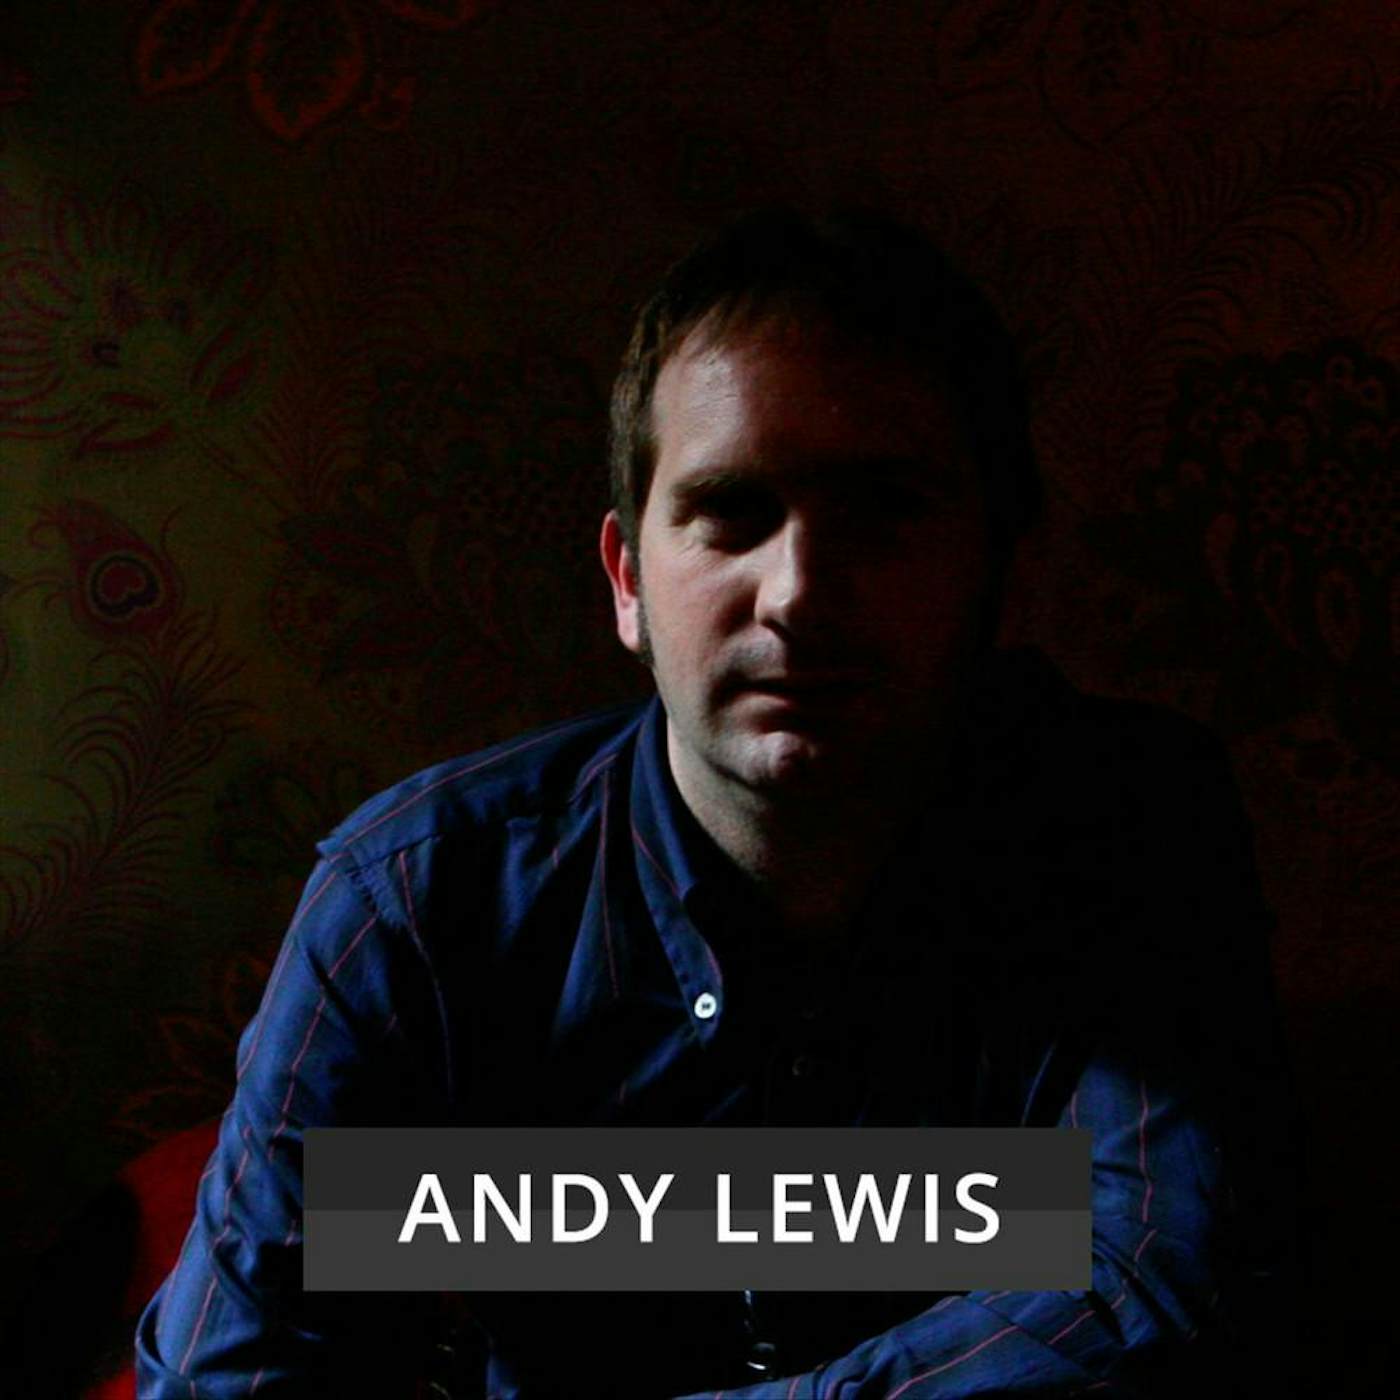 Andy Lewis